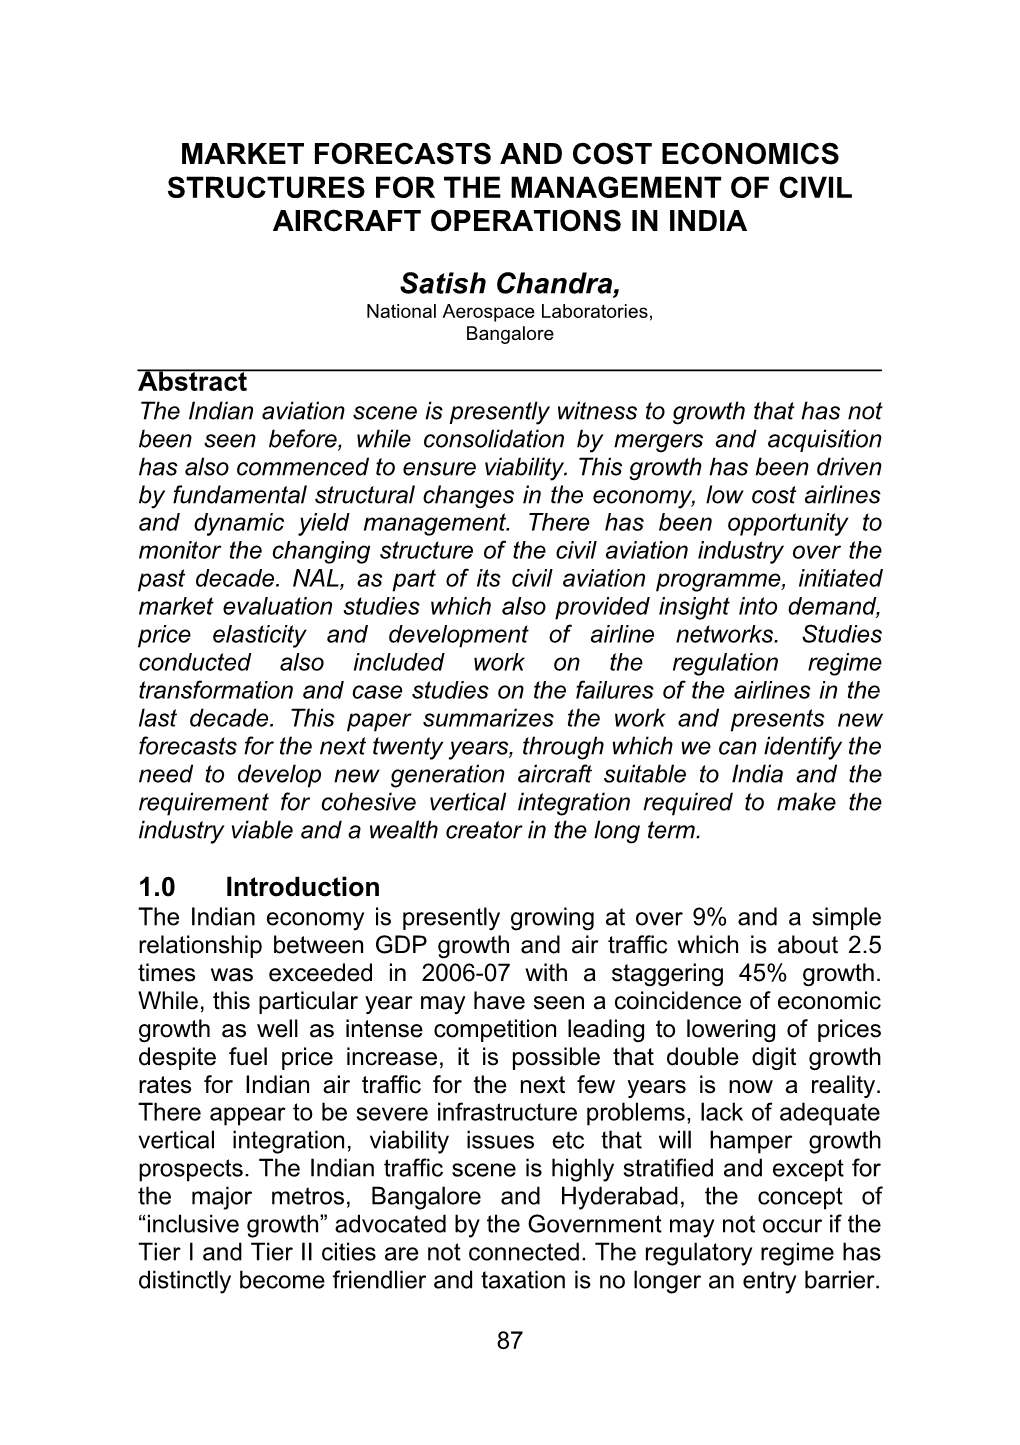 Market Forecasts and Cost Economics Structures for the Management of Civil Aircraft Operations in India